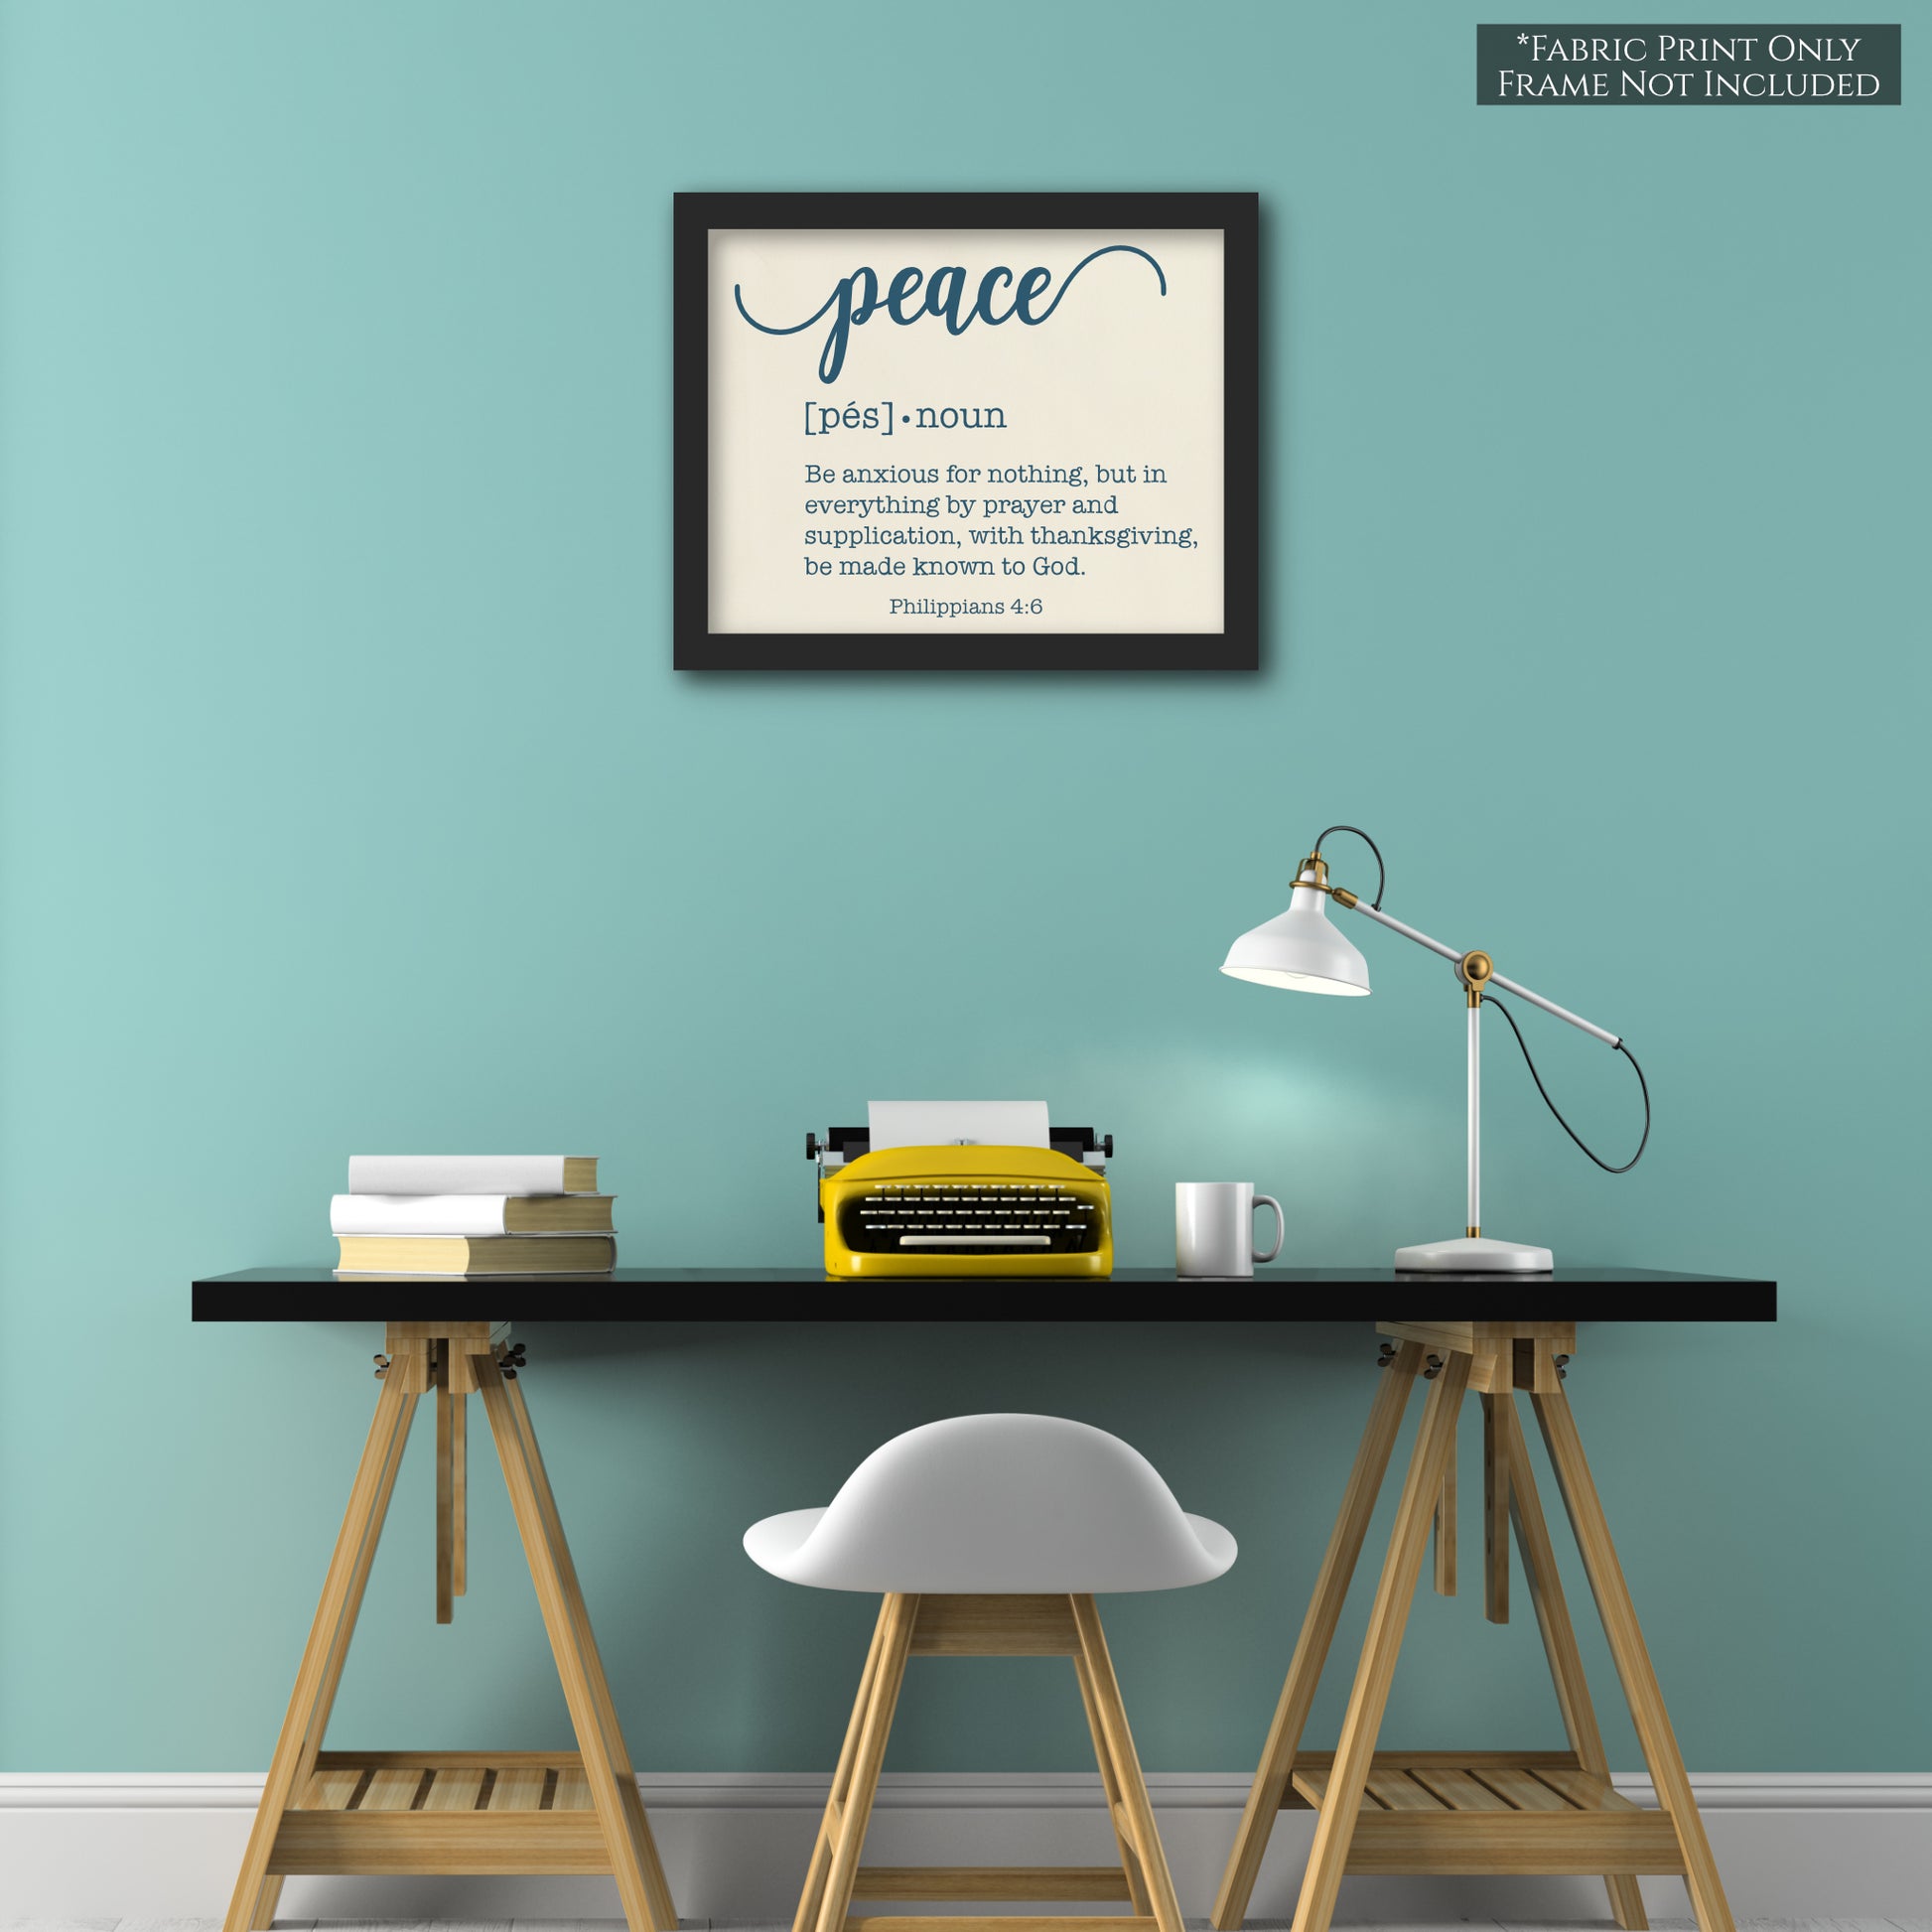 Peace Fabric - Be anxious for nothing, but in everything by prayer and supplication, with thanksgiving, be made known to God. - Philippians 4:6 - Wall Art